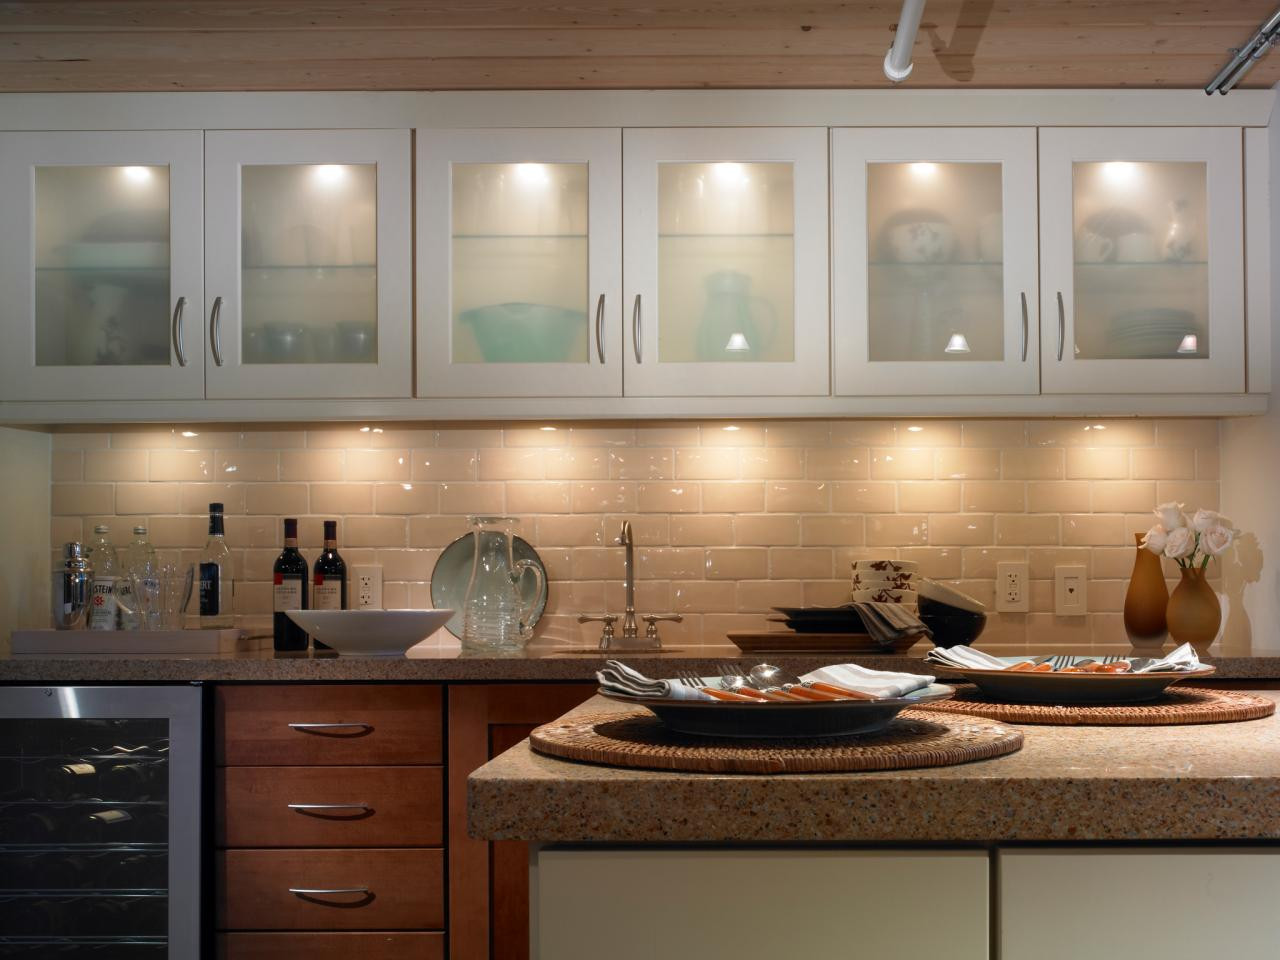 Under The Kitchen Cabinet Lighting
 Practical lighting for your house or apartment